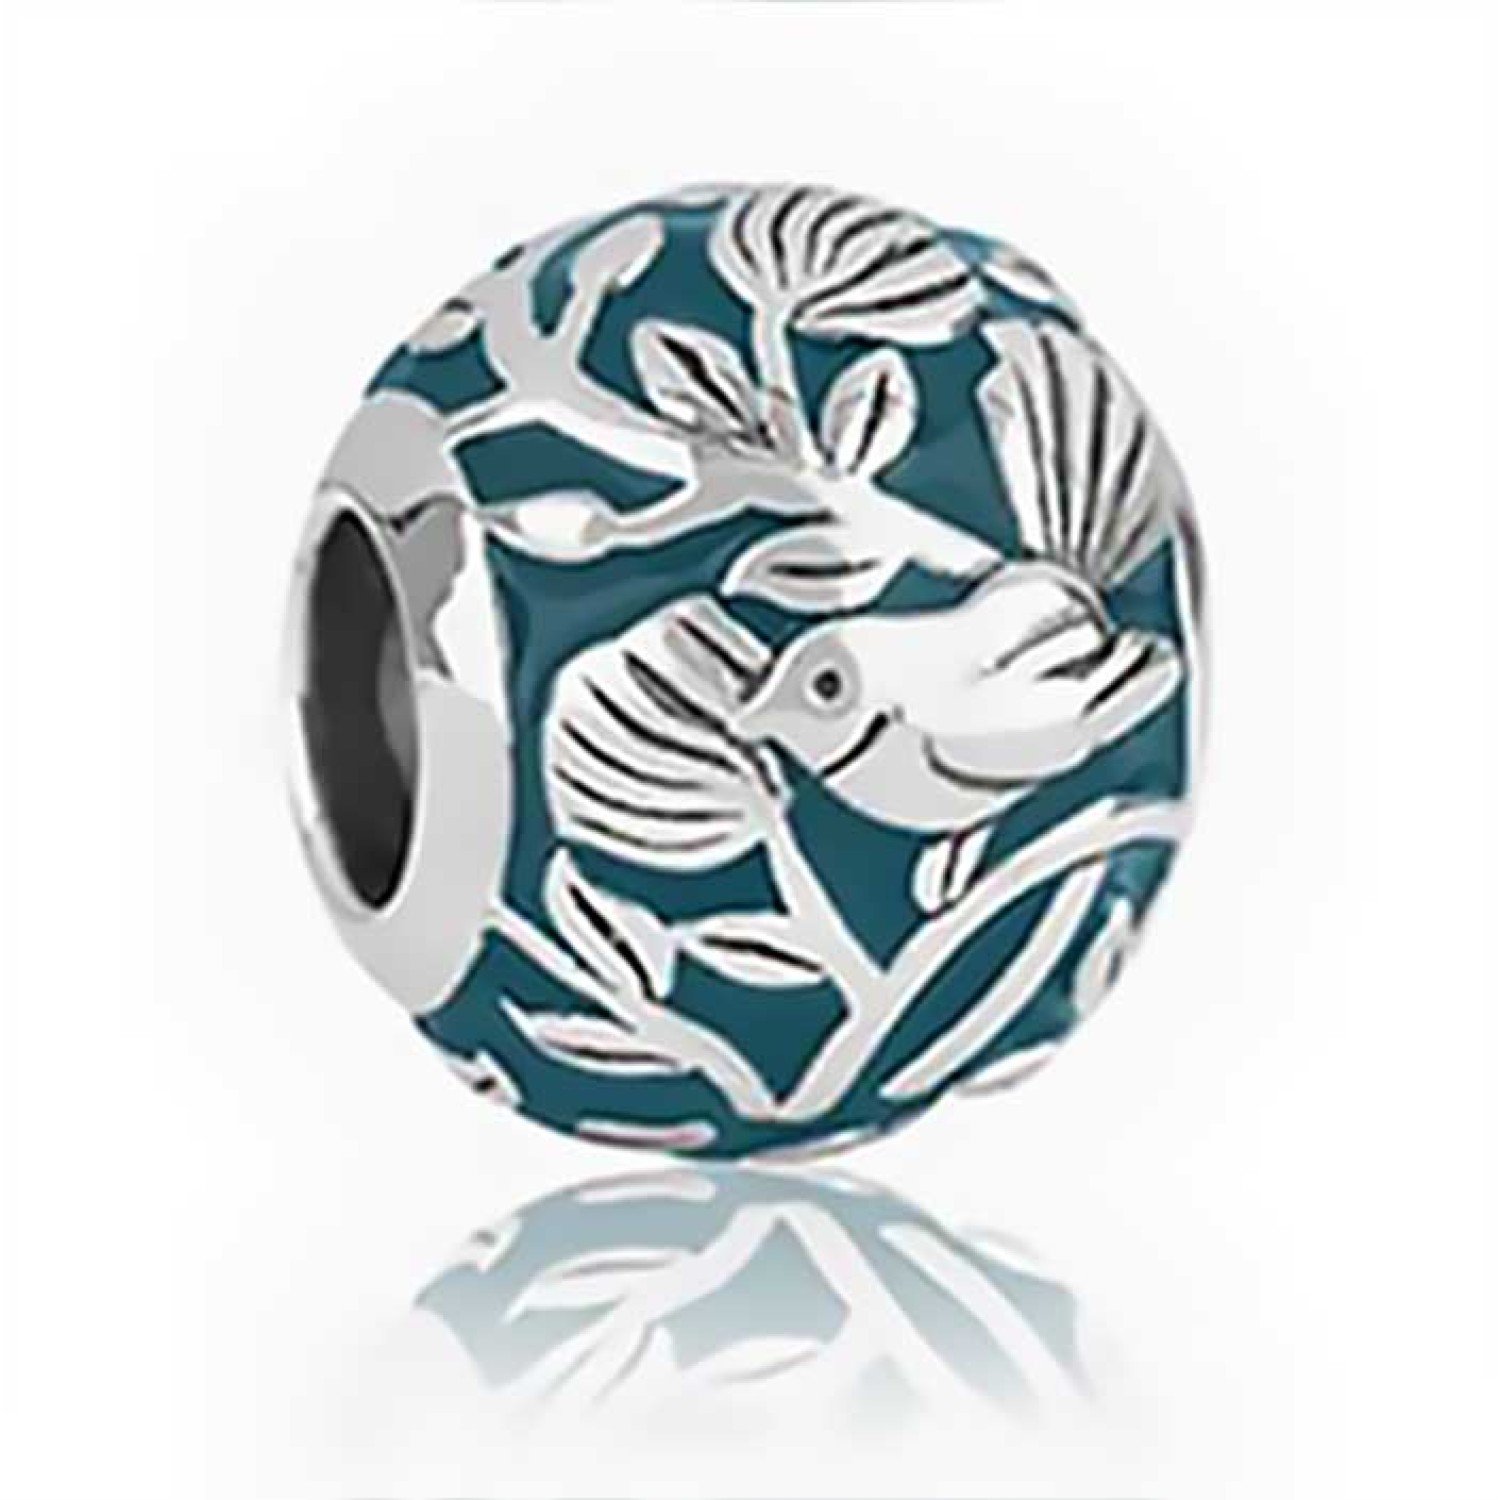 LKE060 Evolve Jewellery Garden Fantail Charm. The curious fantail (piwakawaka) is one of our most cherished native birds, respected as a symbolic messenger. These friendly little characters are known for their unique fan-shaped tail and playful antics, as